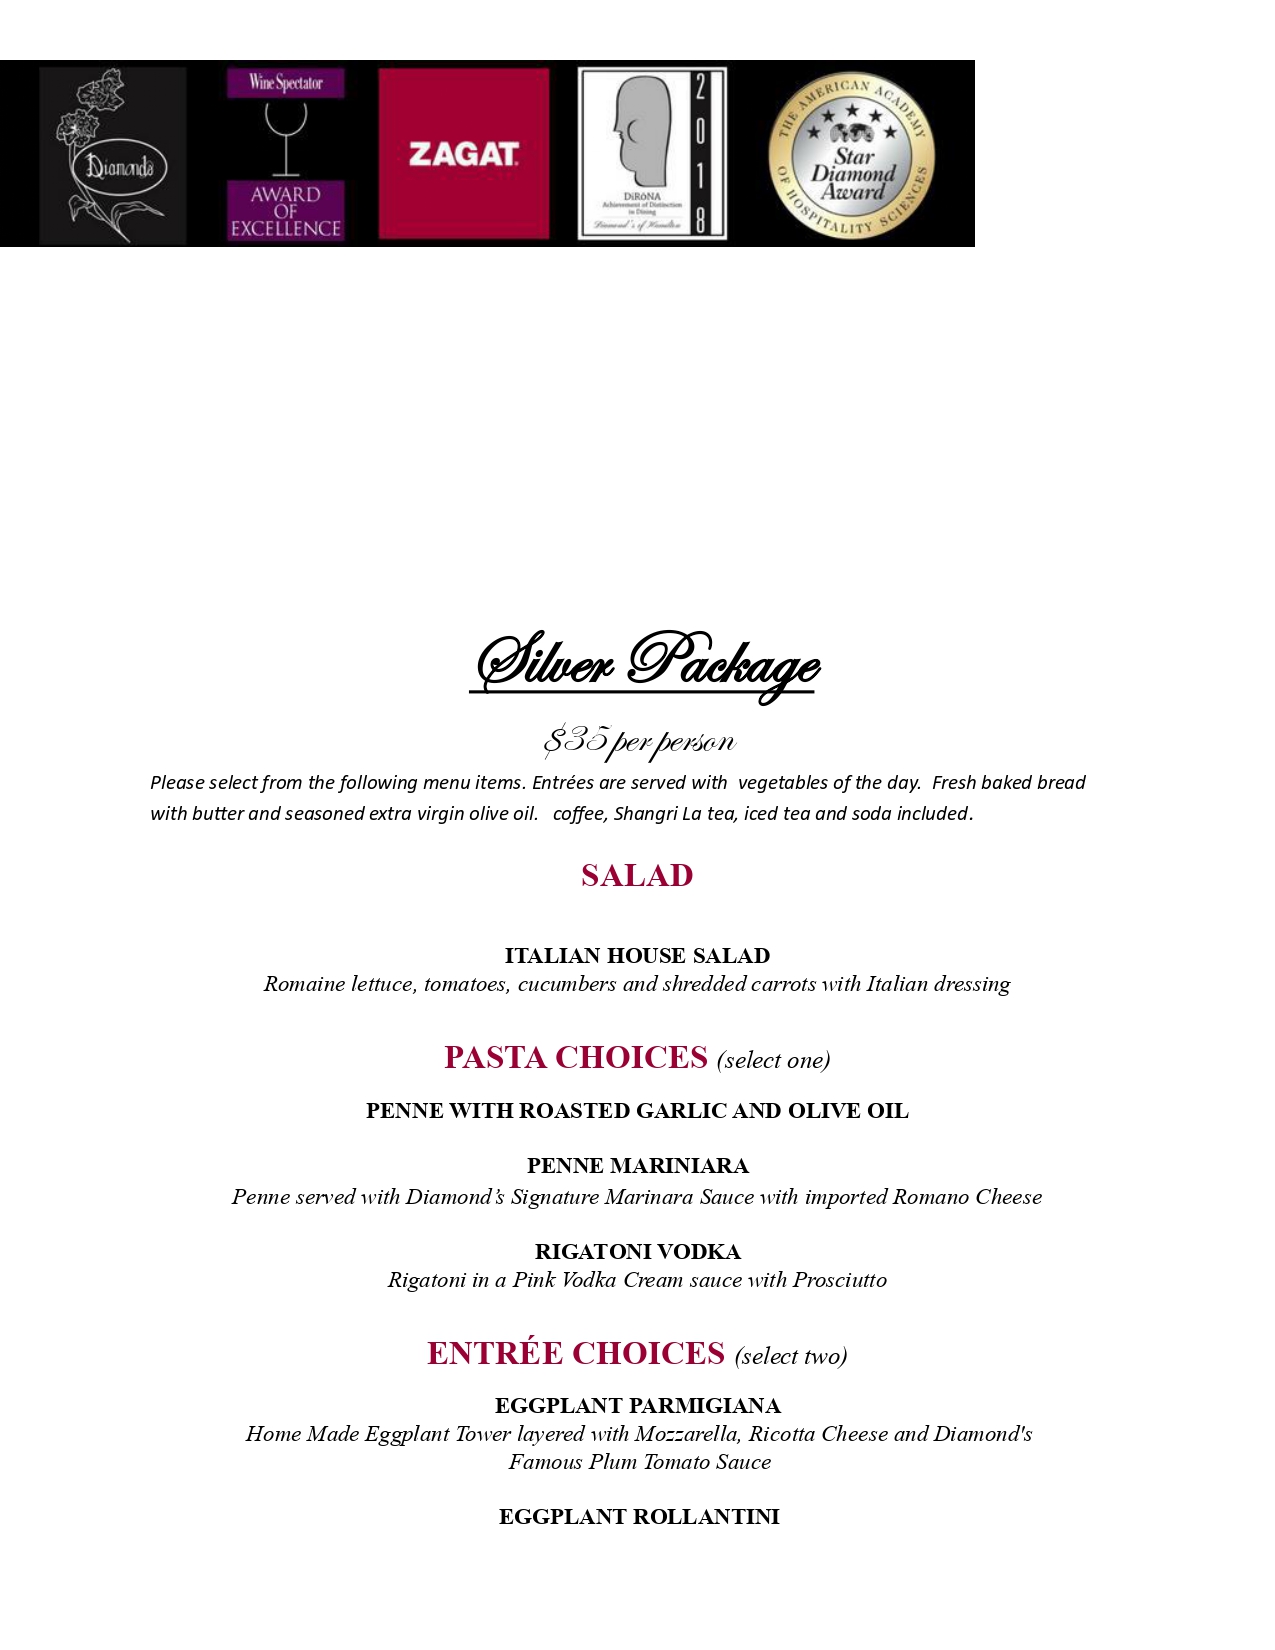 Image of a menu titled "silver package" offering selections for a salad, pasta choices, penne marinara, rigatoni vodka, and eggplant rollatini, including a description of beverages and iron-skillet bread.